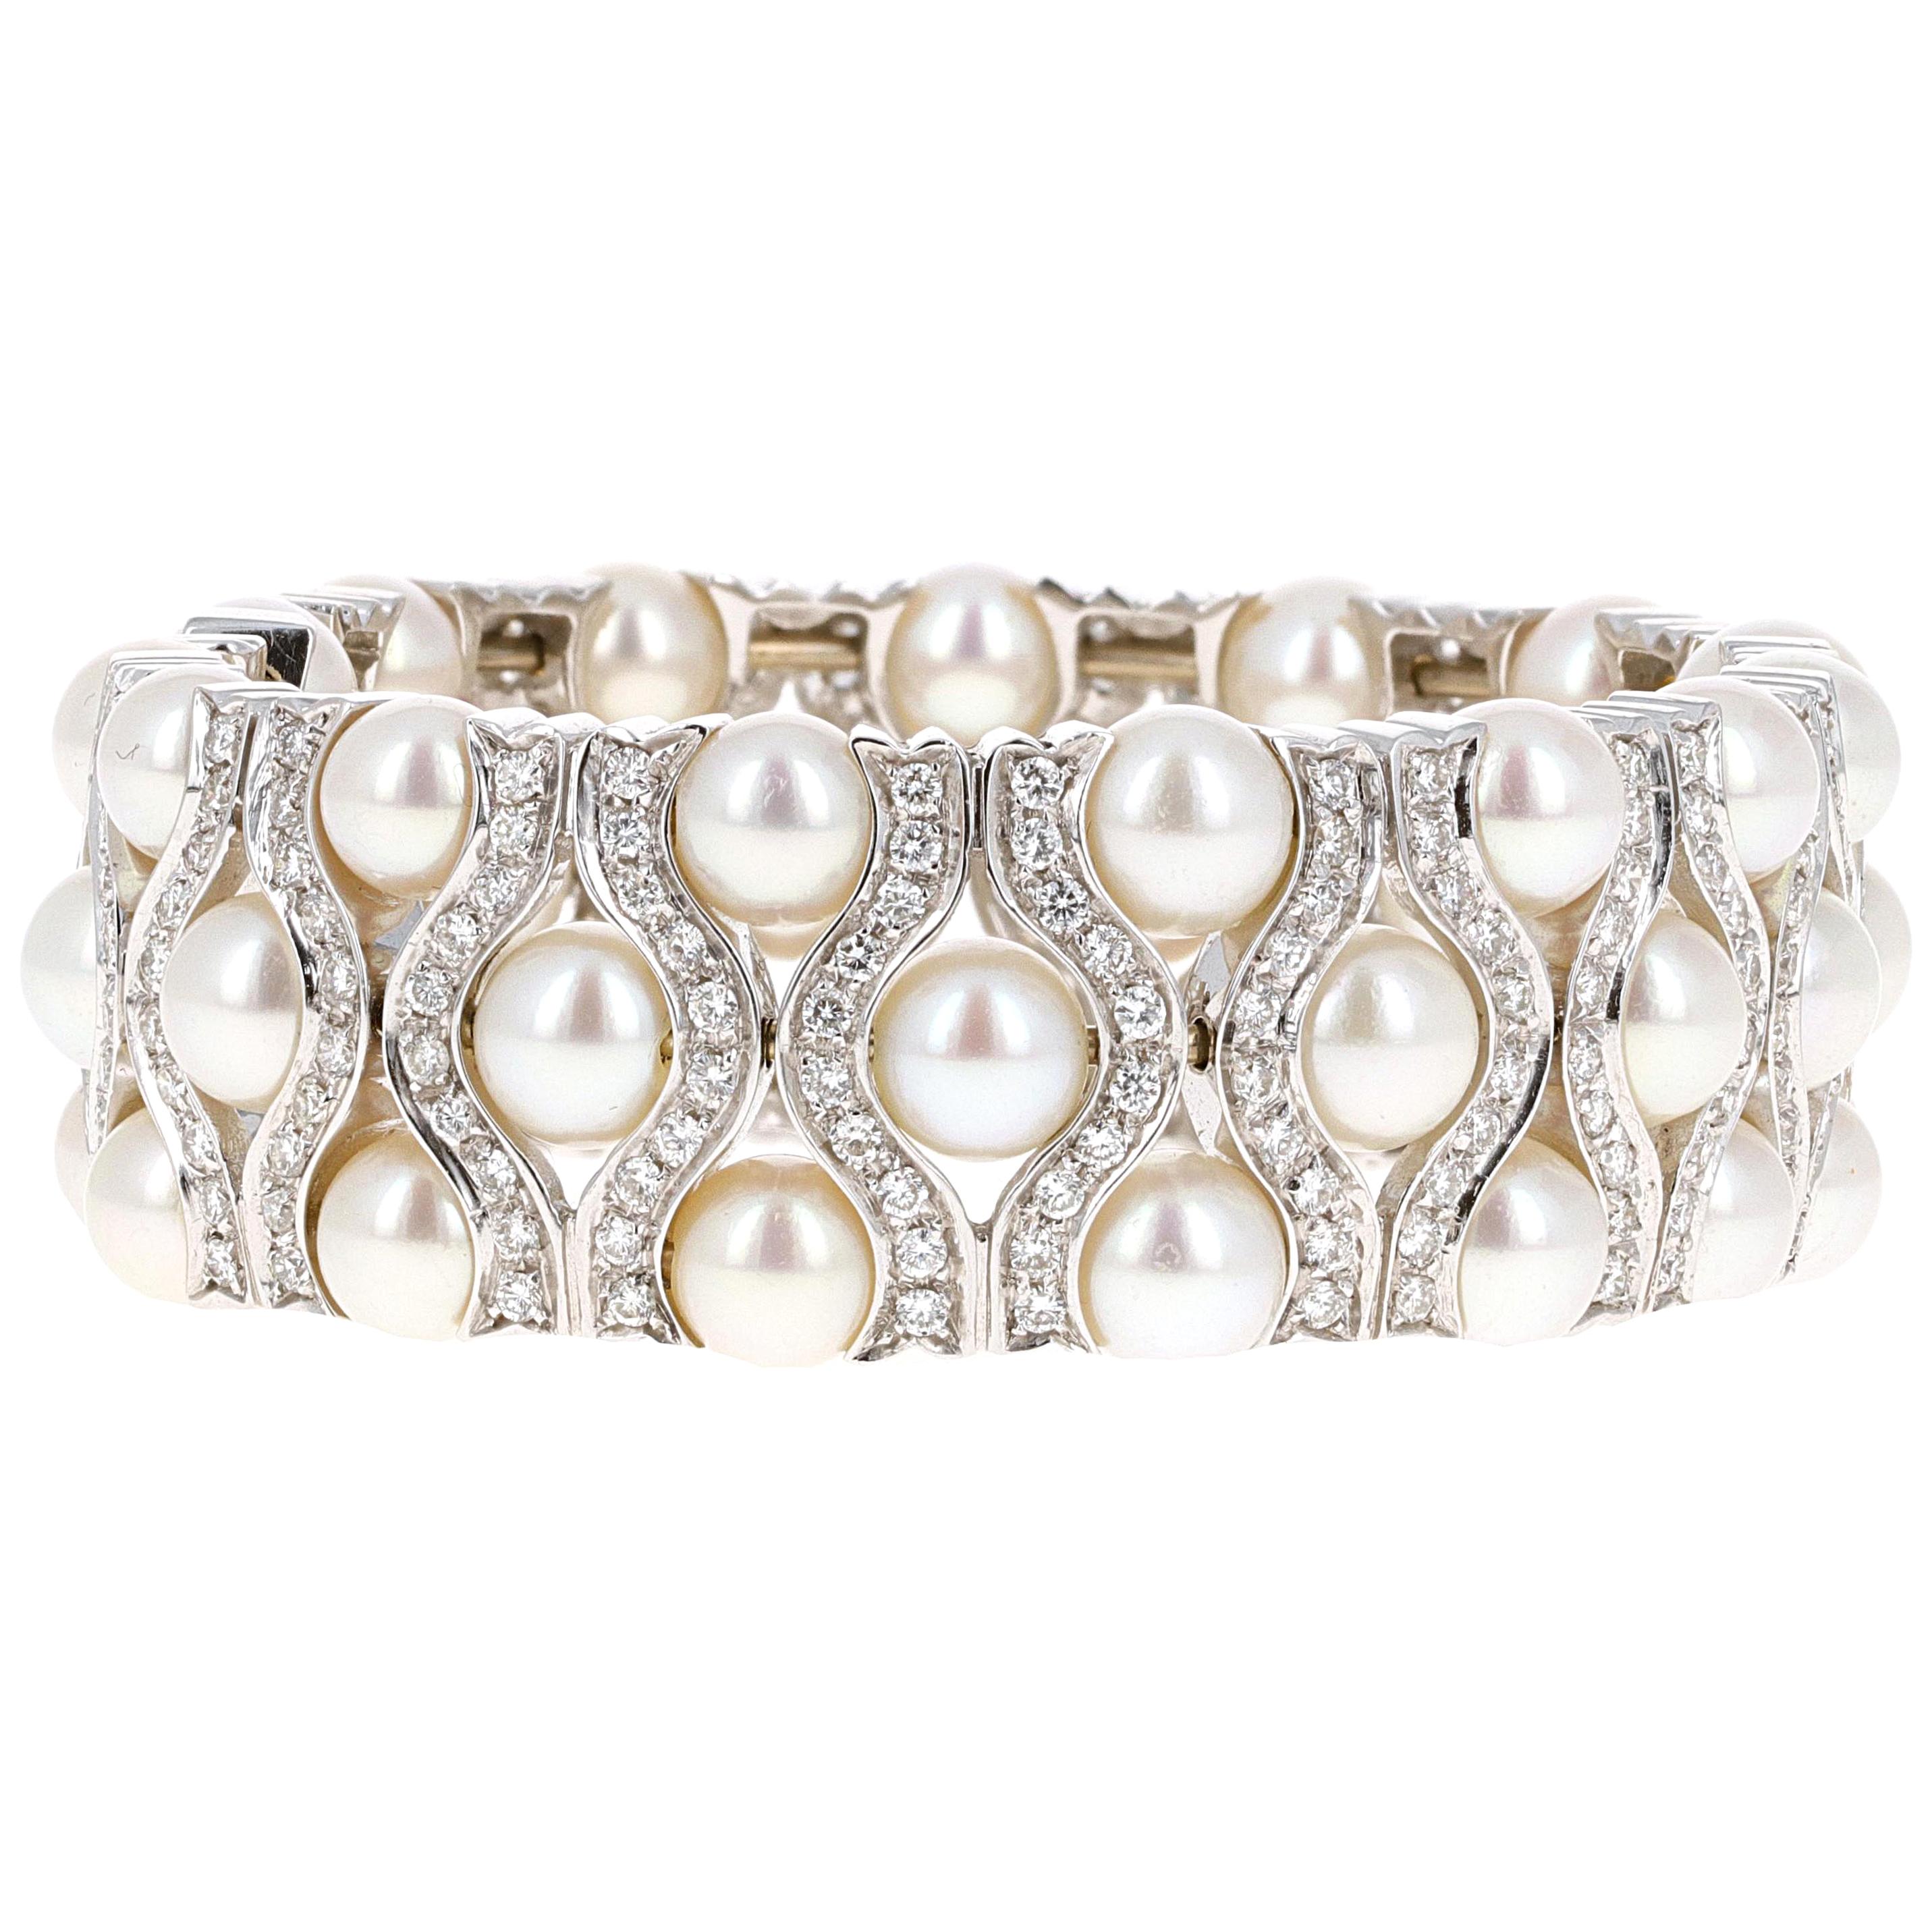 18 karat white gold natural pearl and diamond cuff bangle bracelet. The cuff has slight flexibility allowing you to place it on your wrist with ease and remove it worry free. The cuff has 300 white round brilliant diamonds,  in the bracelet weighing